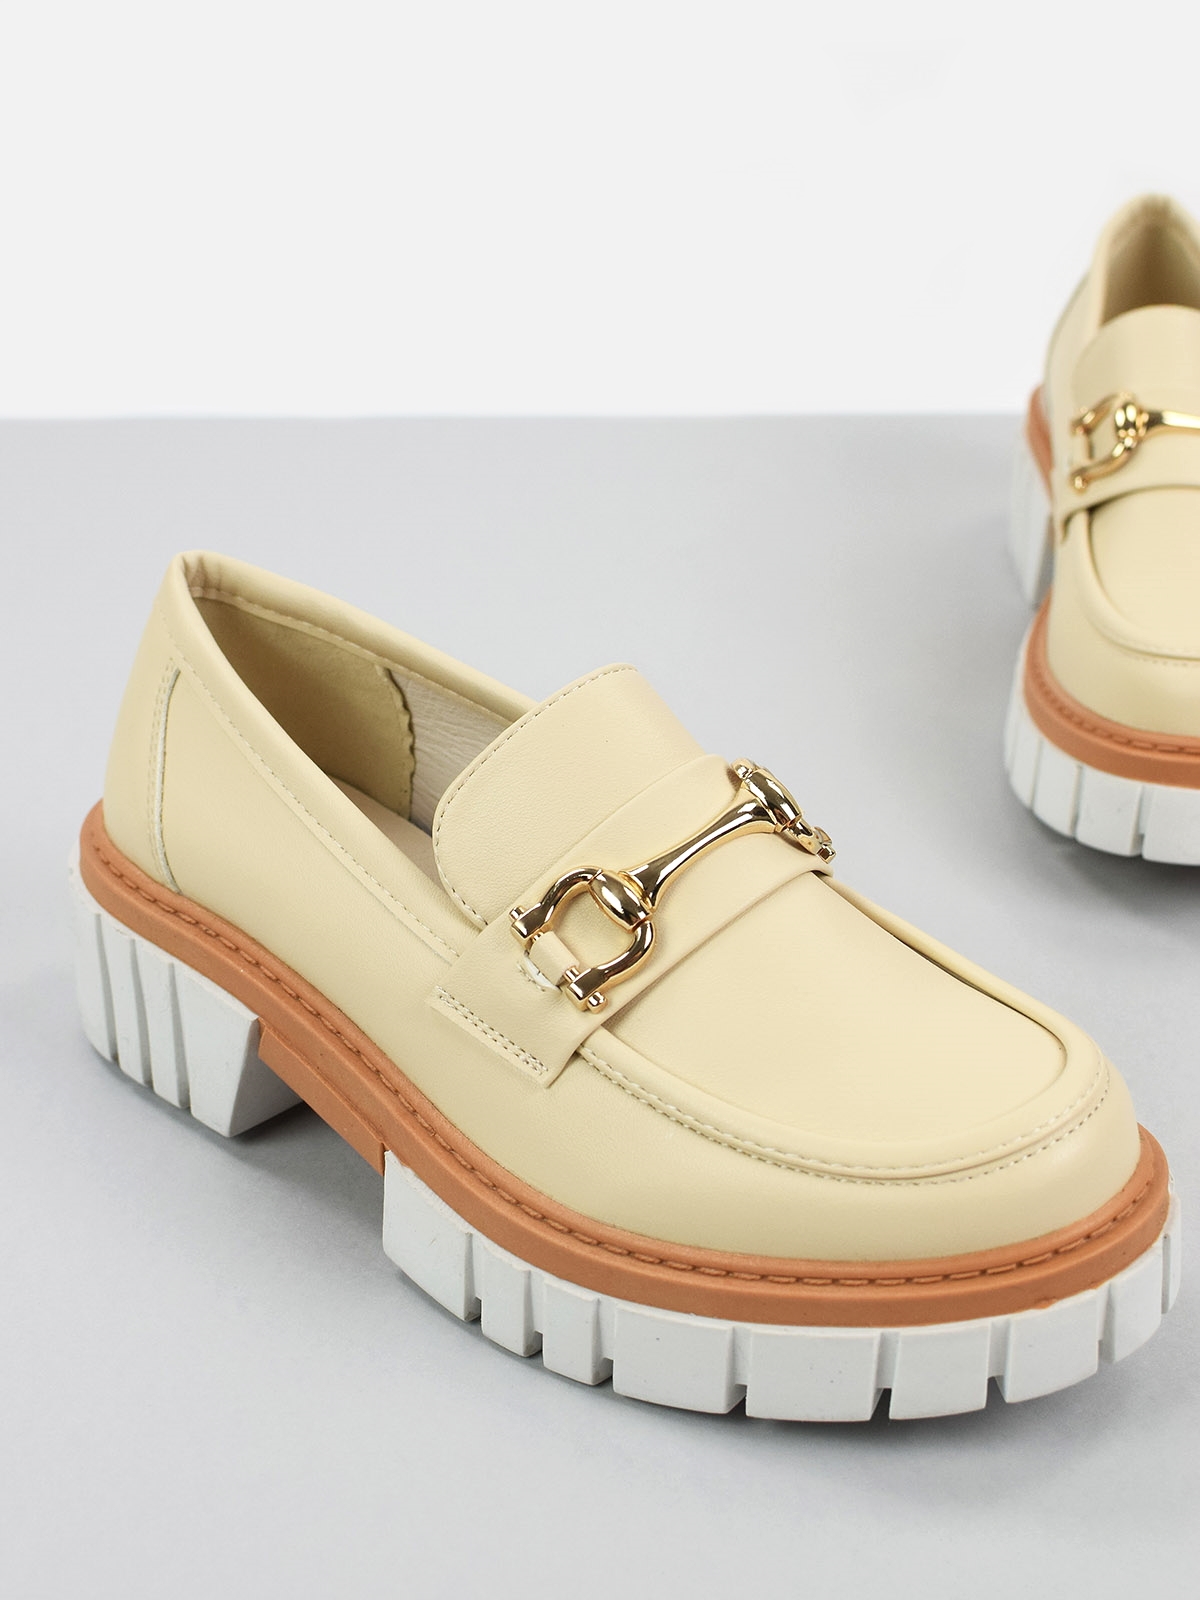 Chunky loafers with front gold trim in neutral color